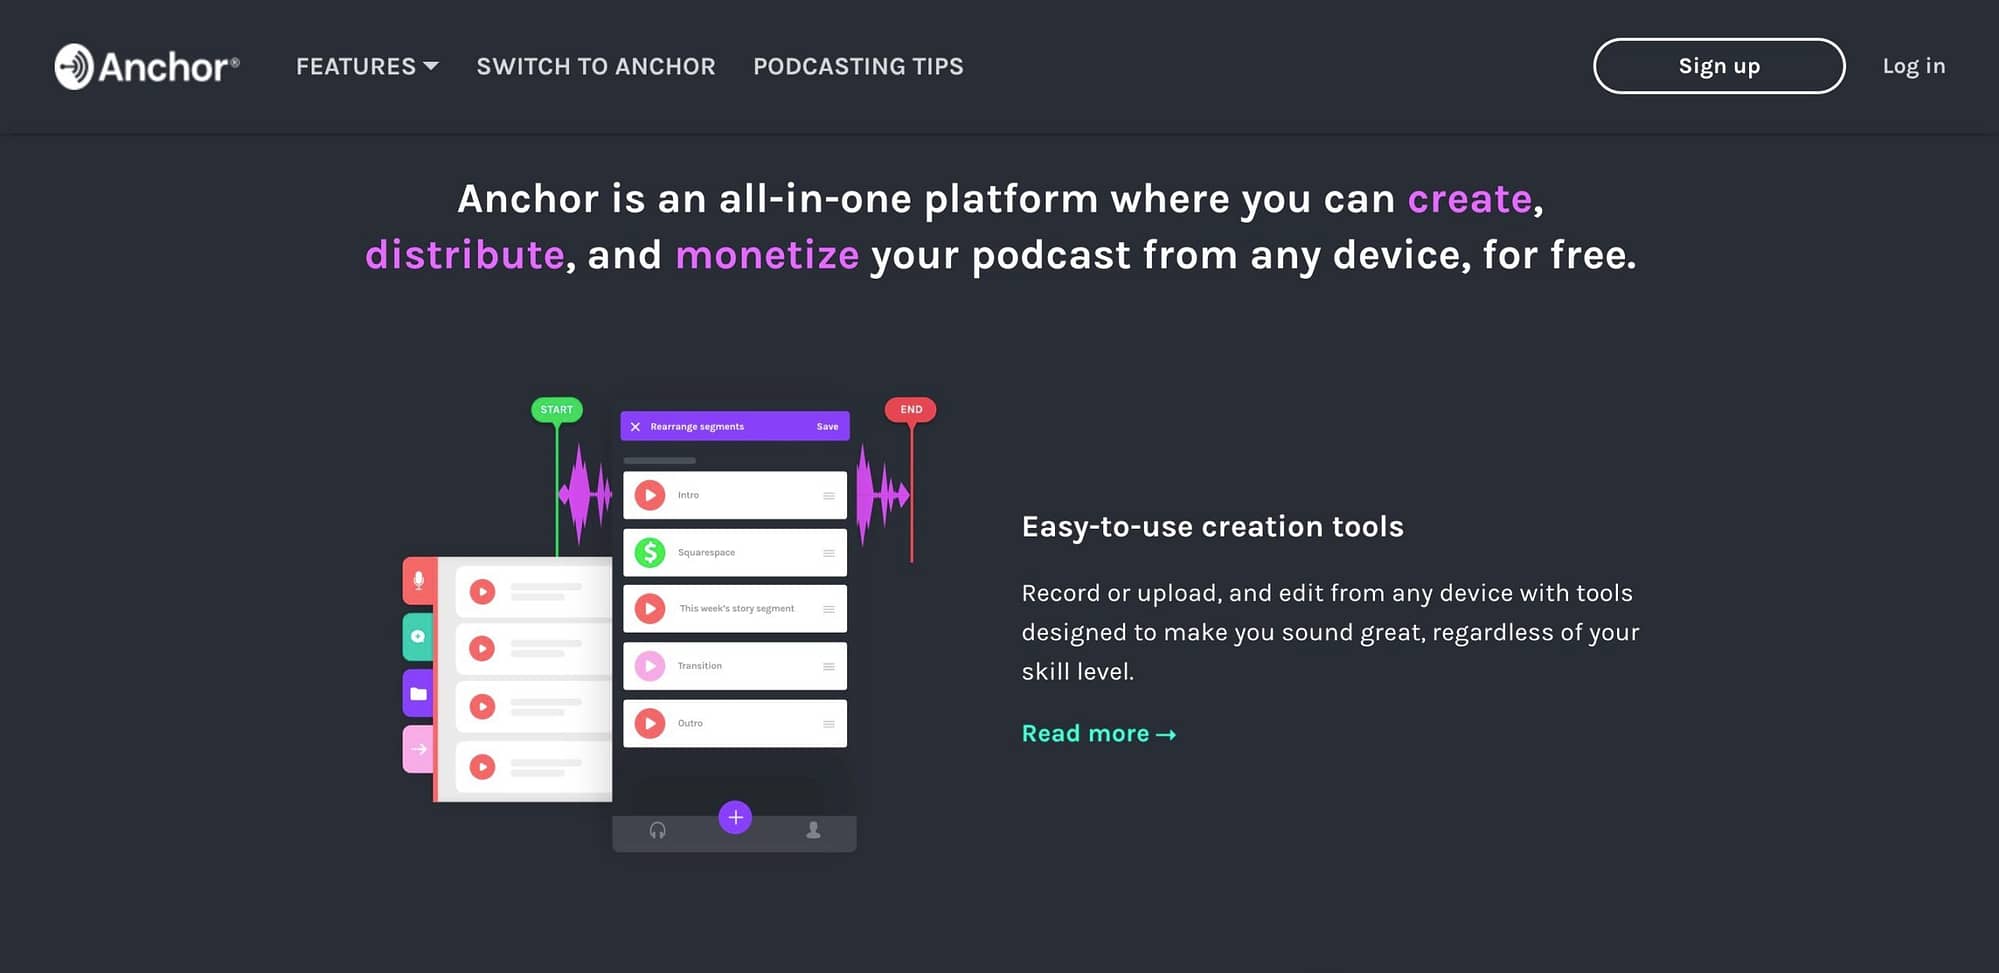 Anchor offers a great range of features for free podcast hosting